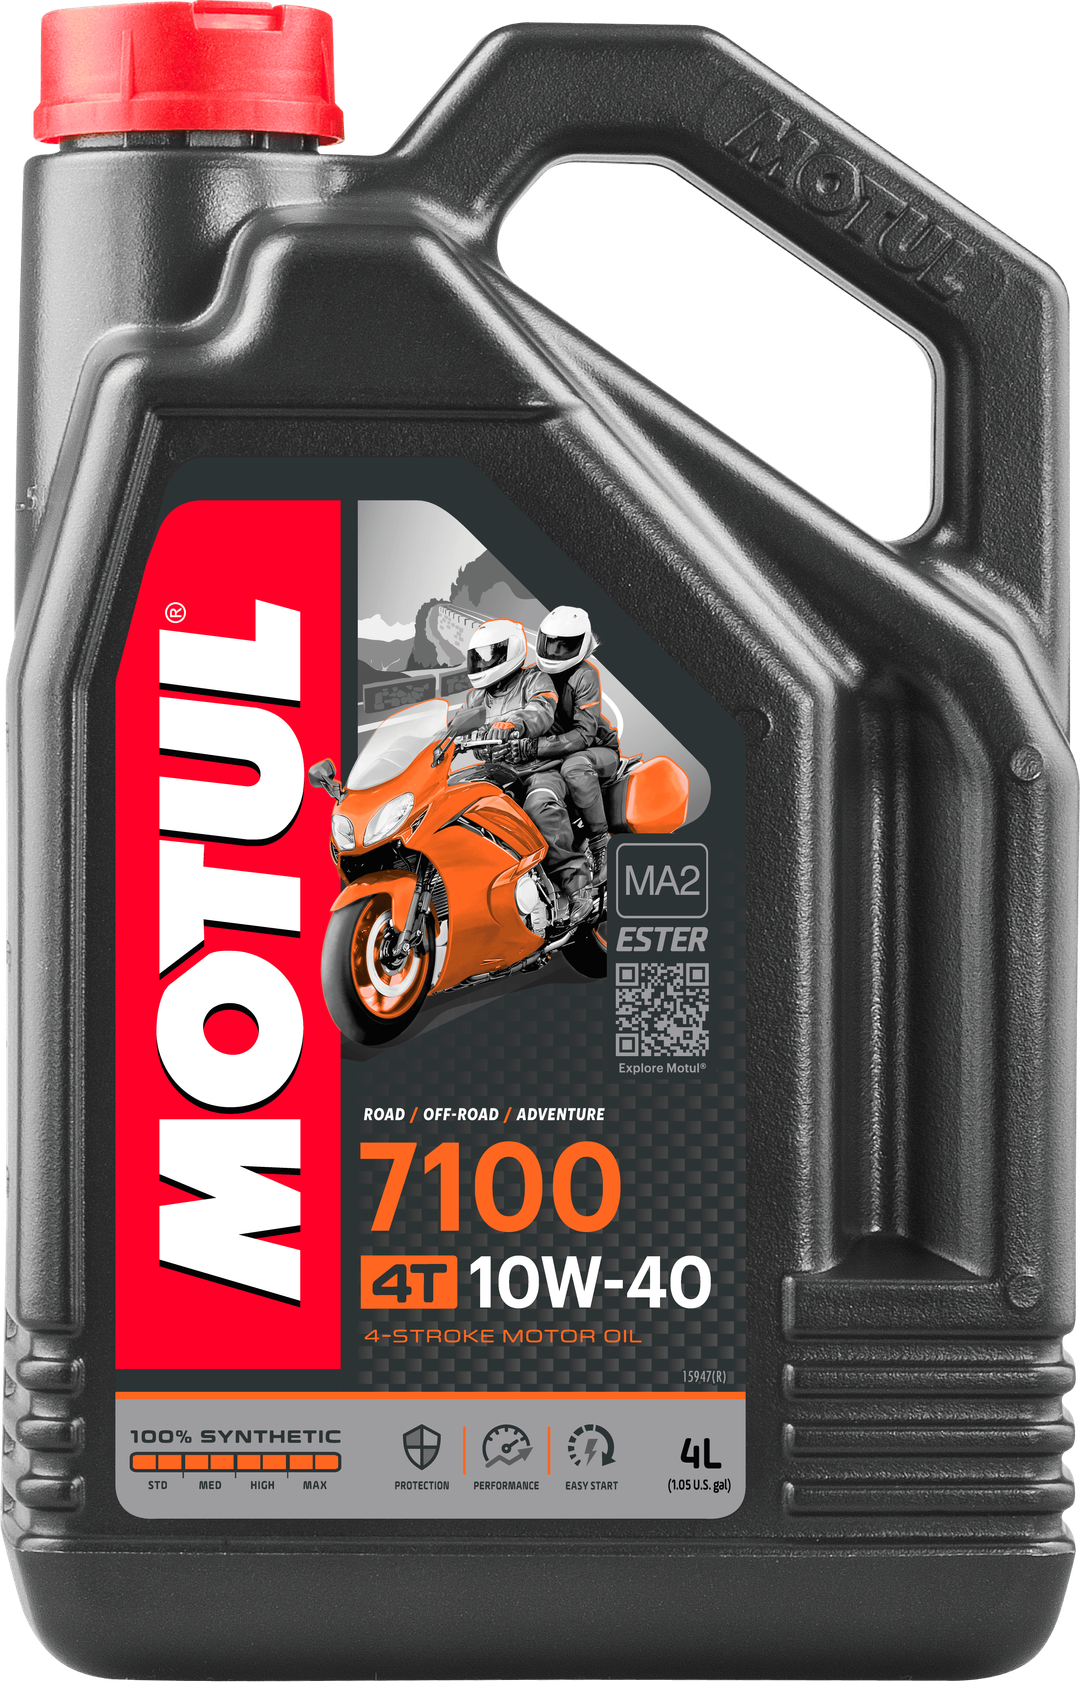 Motul: engine oils, lubricants, car and motorcycle care